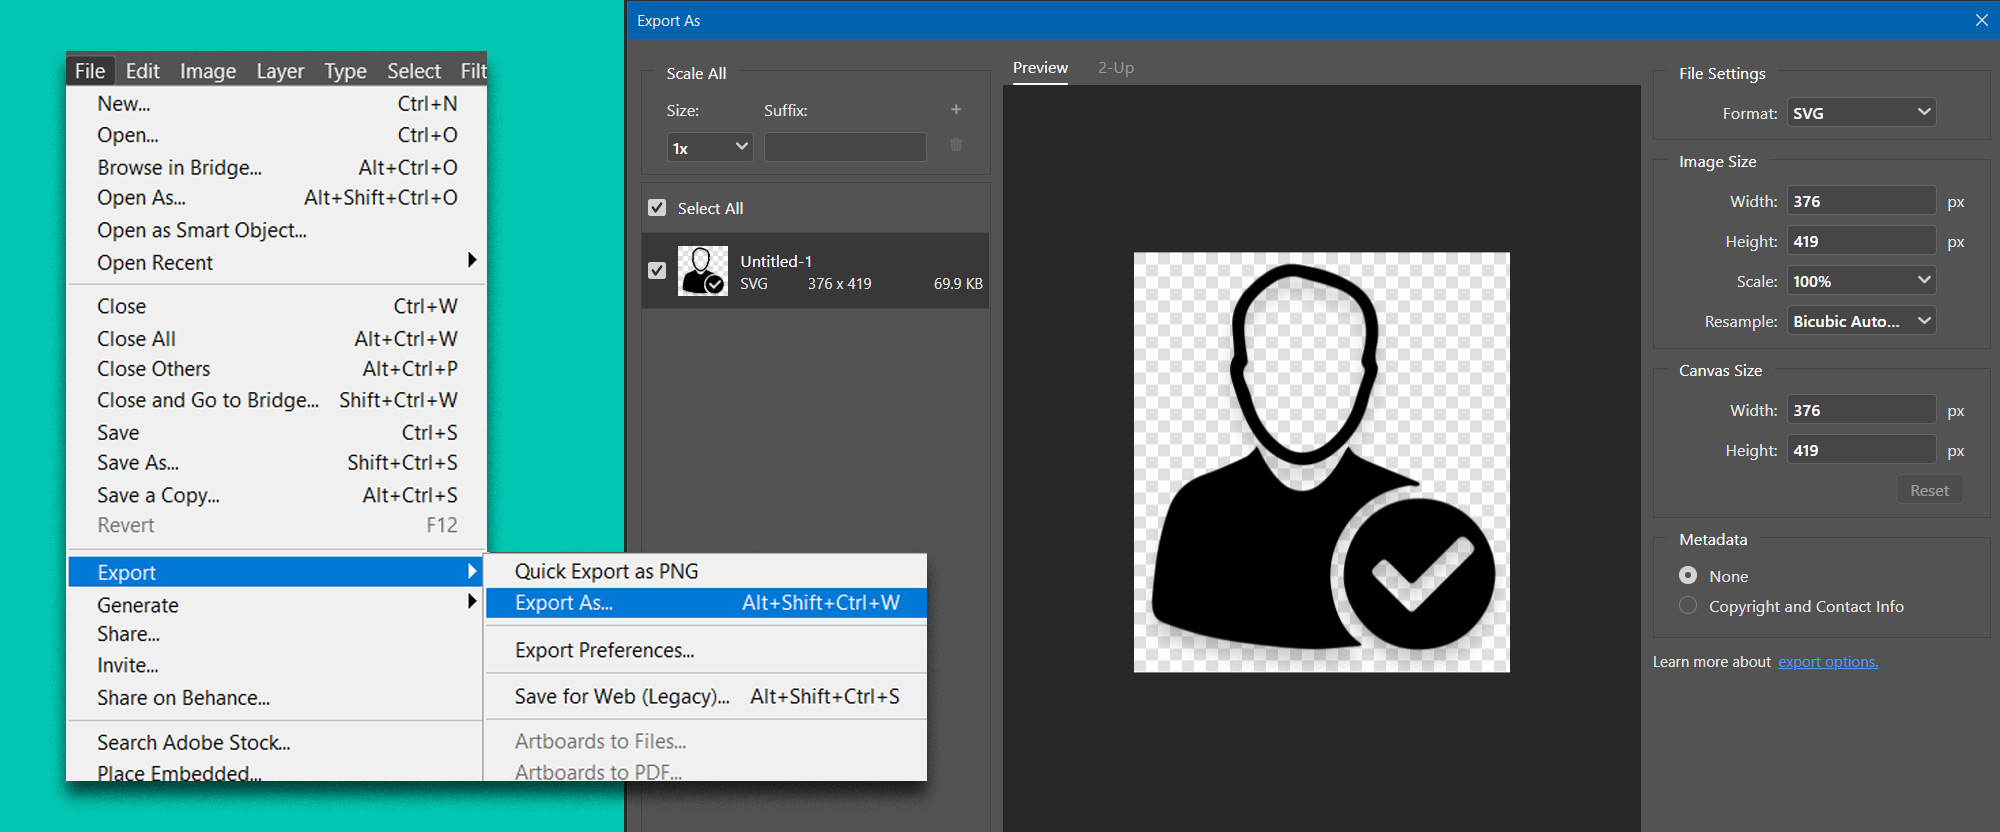 How-to-create-vector-graphics-in-Photoshop